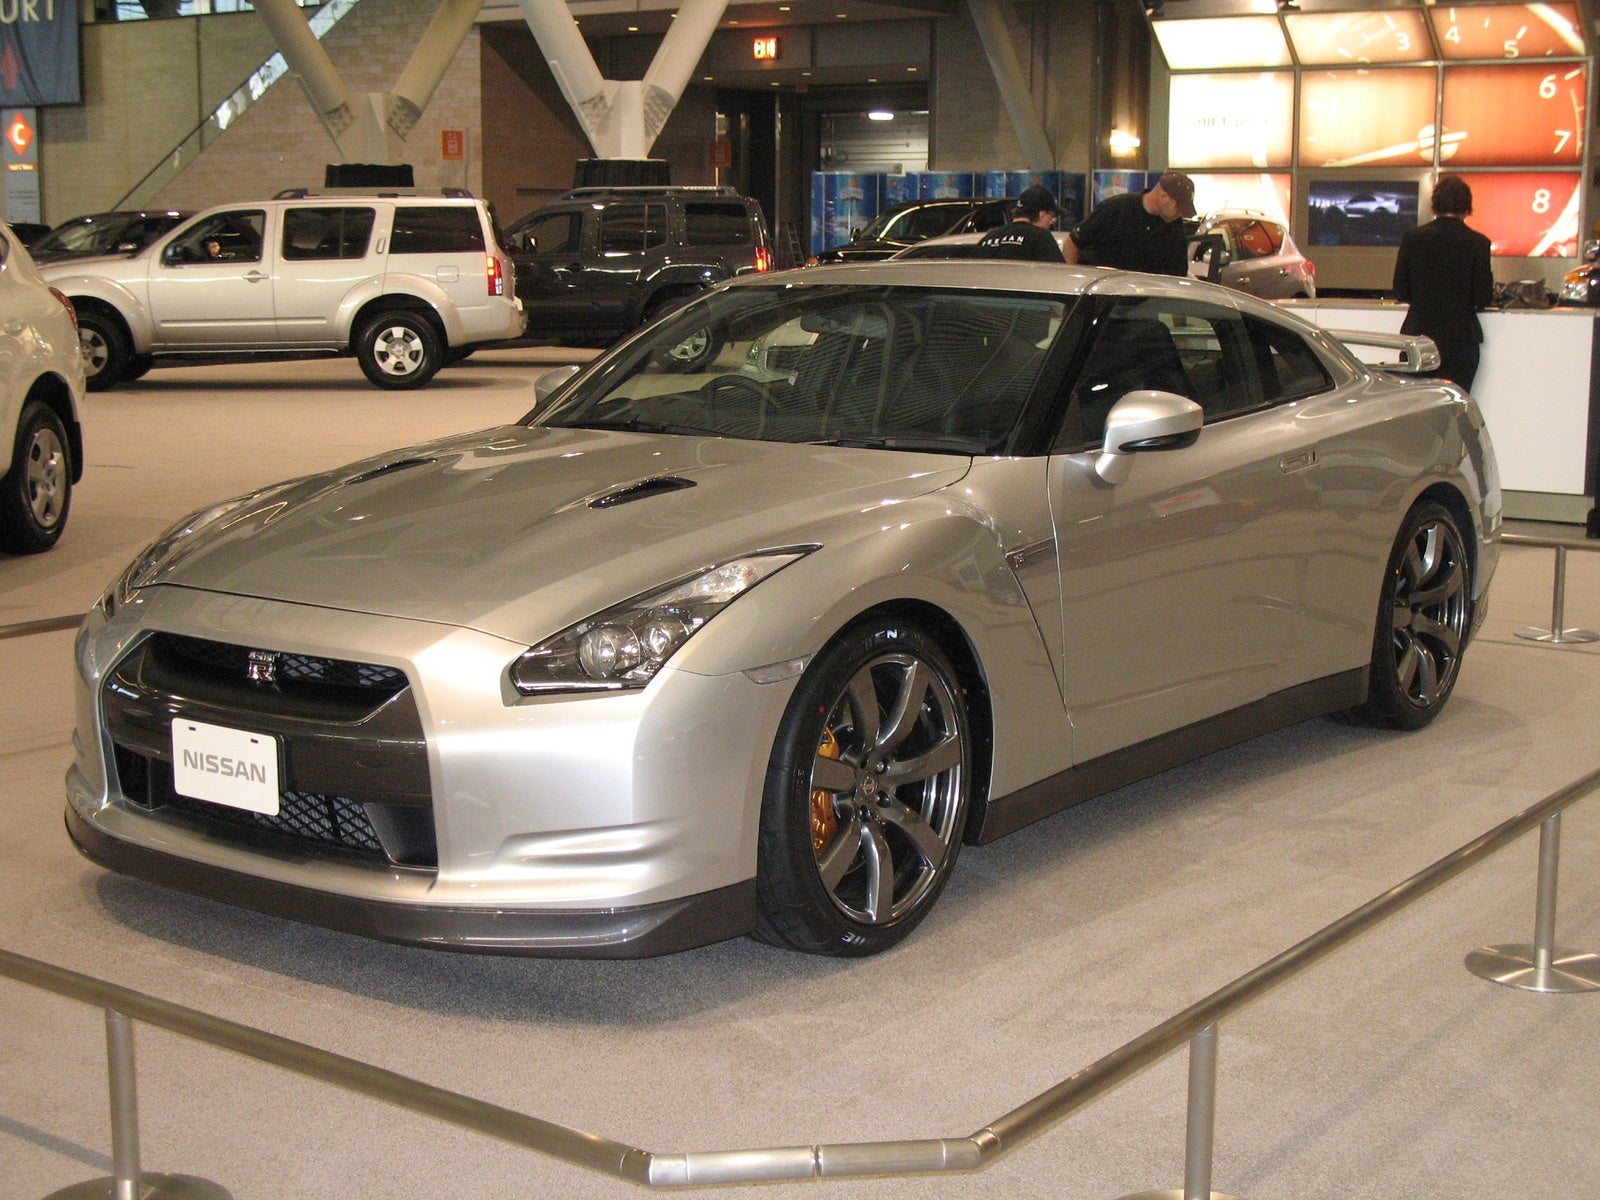 2009 Nissan gt r daily driver #10